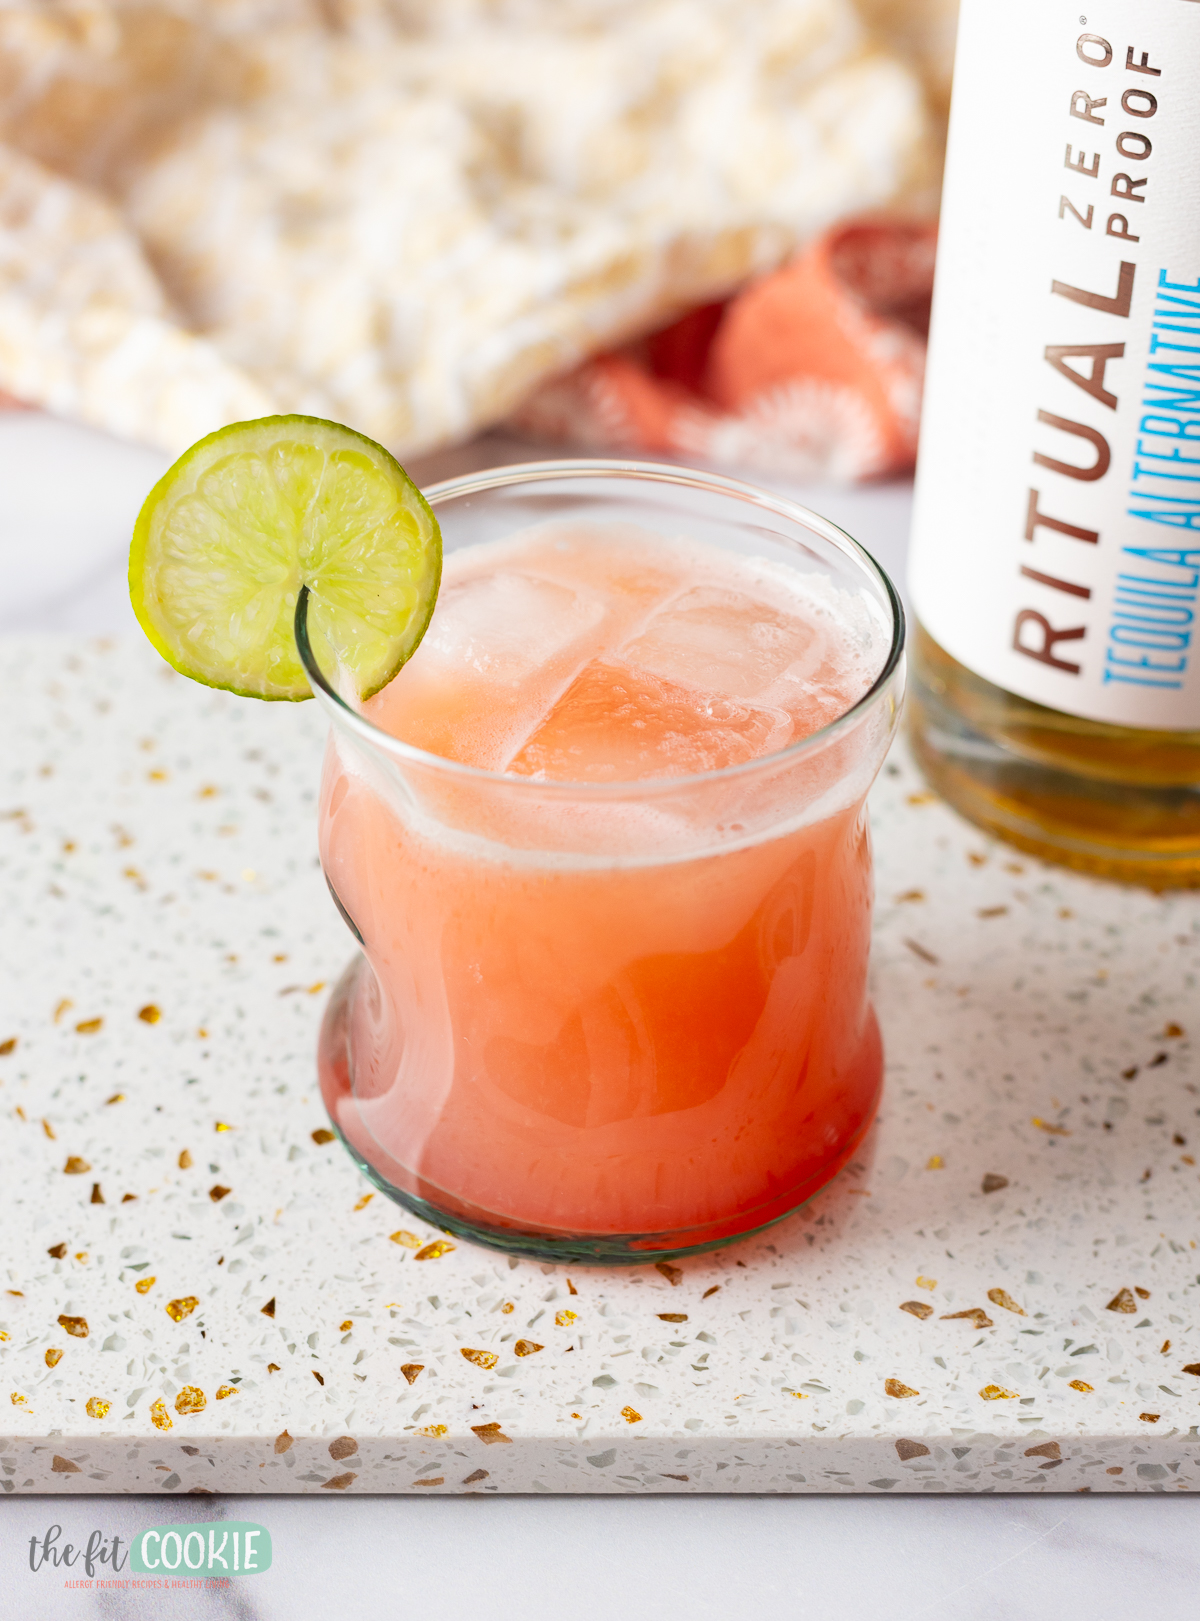 A glass with a lime on it next to a bottle of rum, perfect for making a refreshing Paloma cocktail.